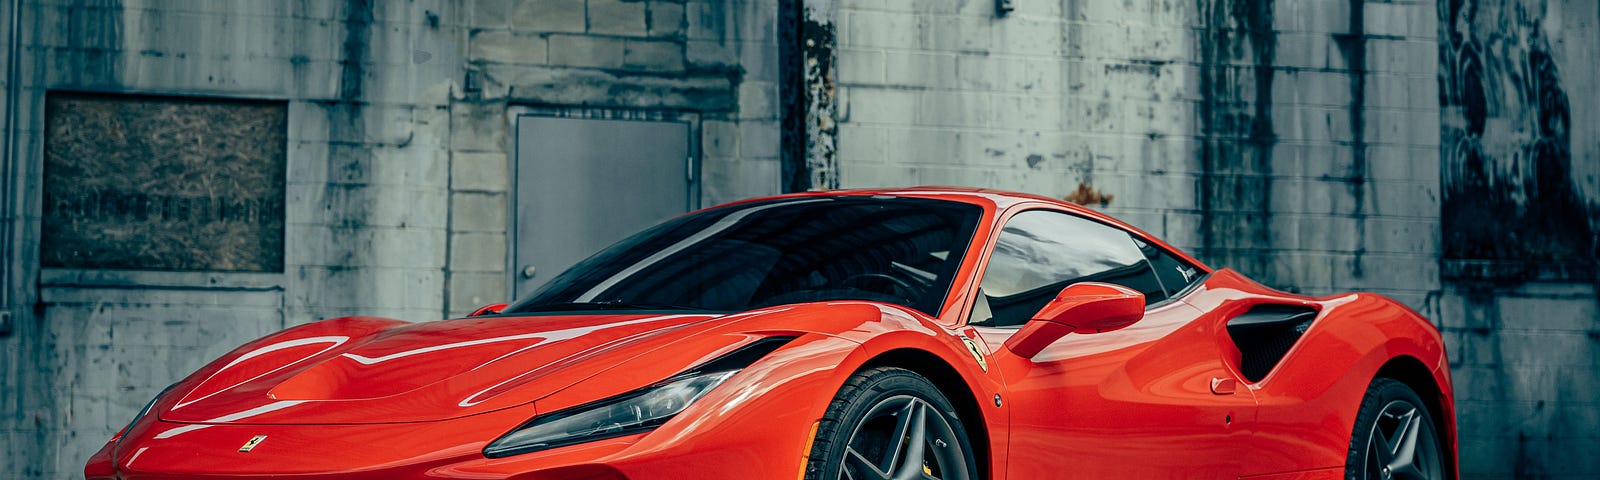 A red Ferrari parked in front of an old grey brick wall, likely in an old factory building.